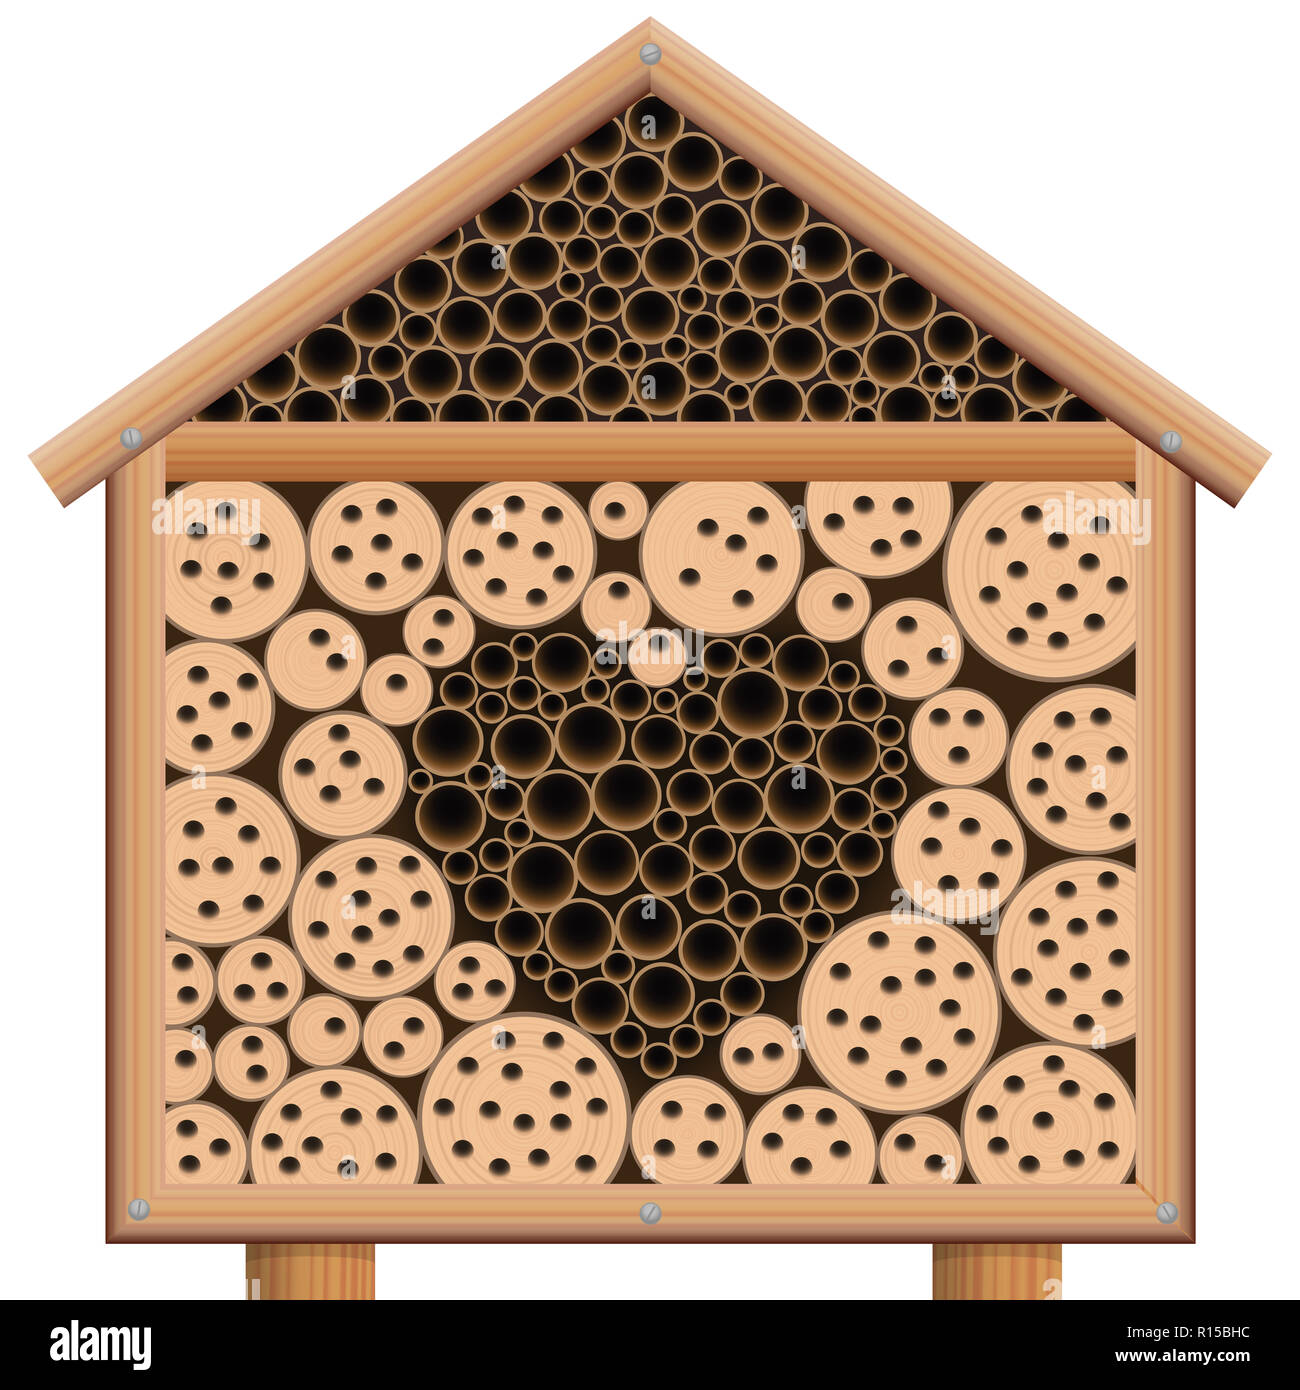 Insect hotel with heart. Symbol for loving insects and bugs. Wooden house with roof - illustration on white background. Stock Photo